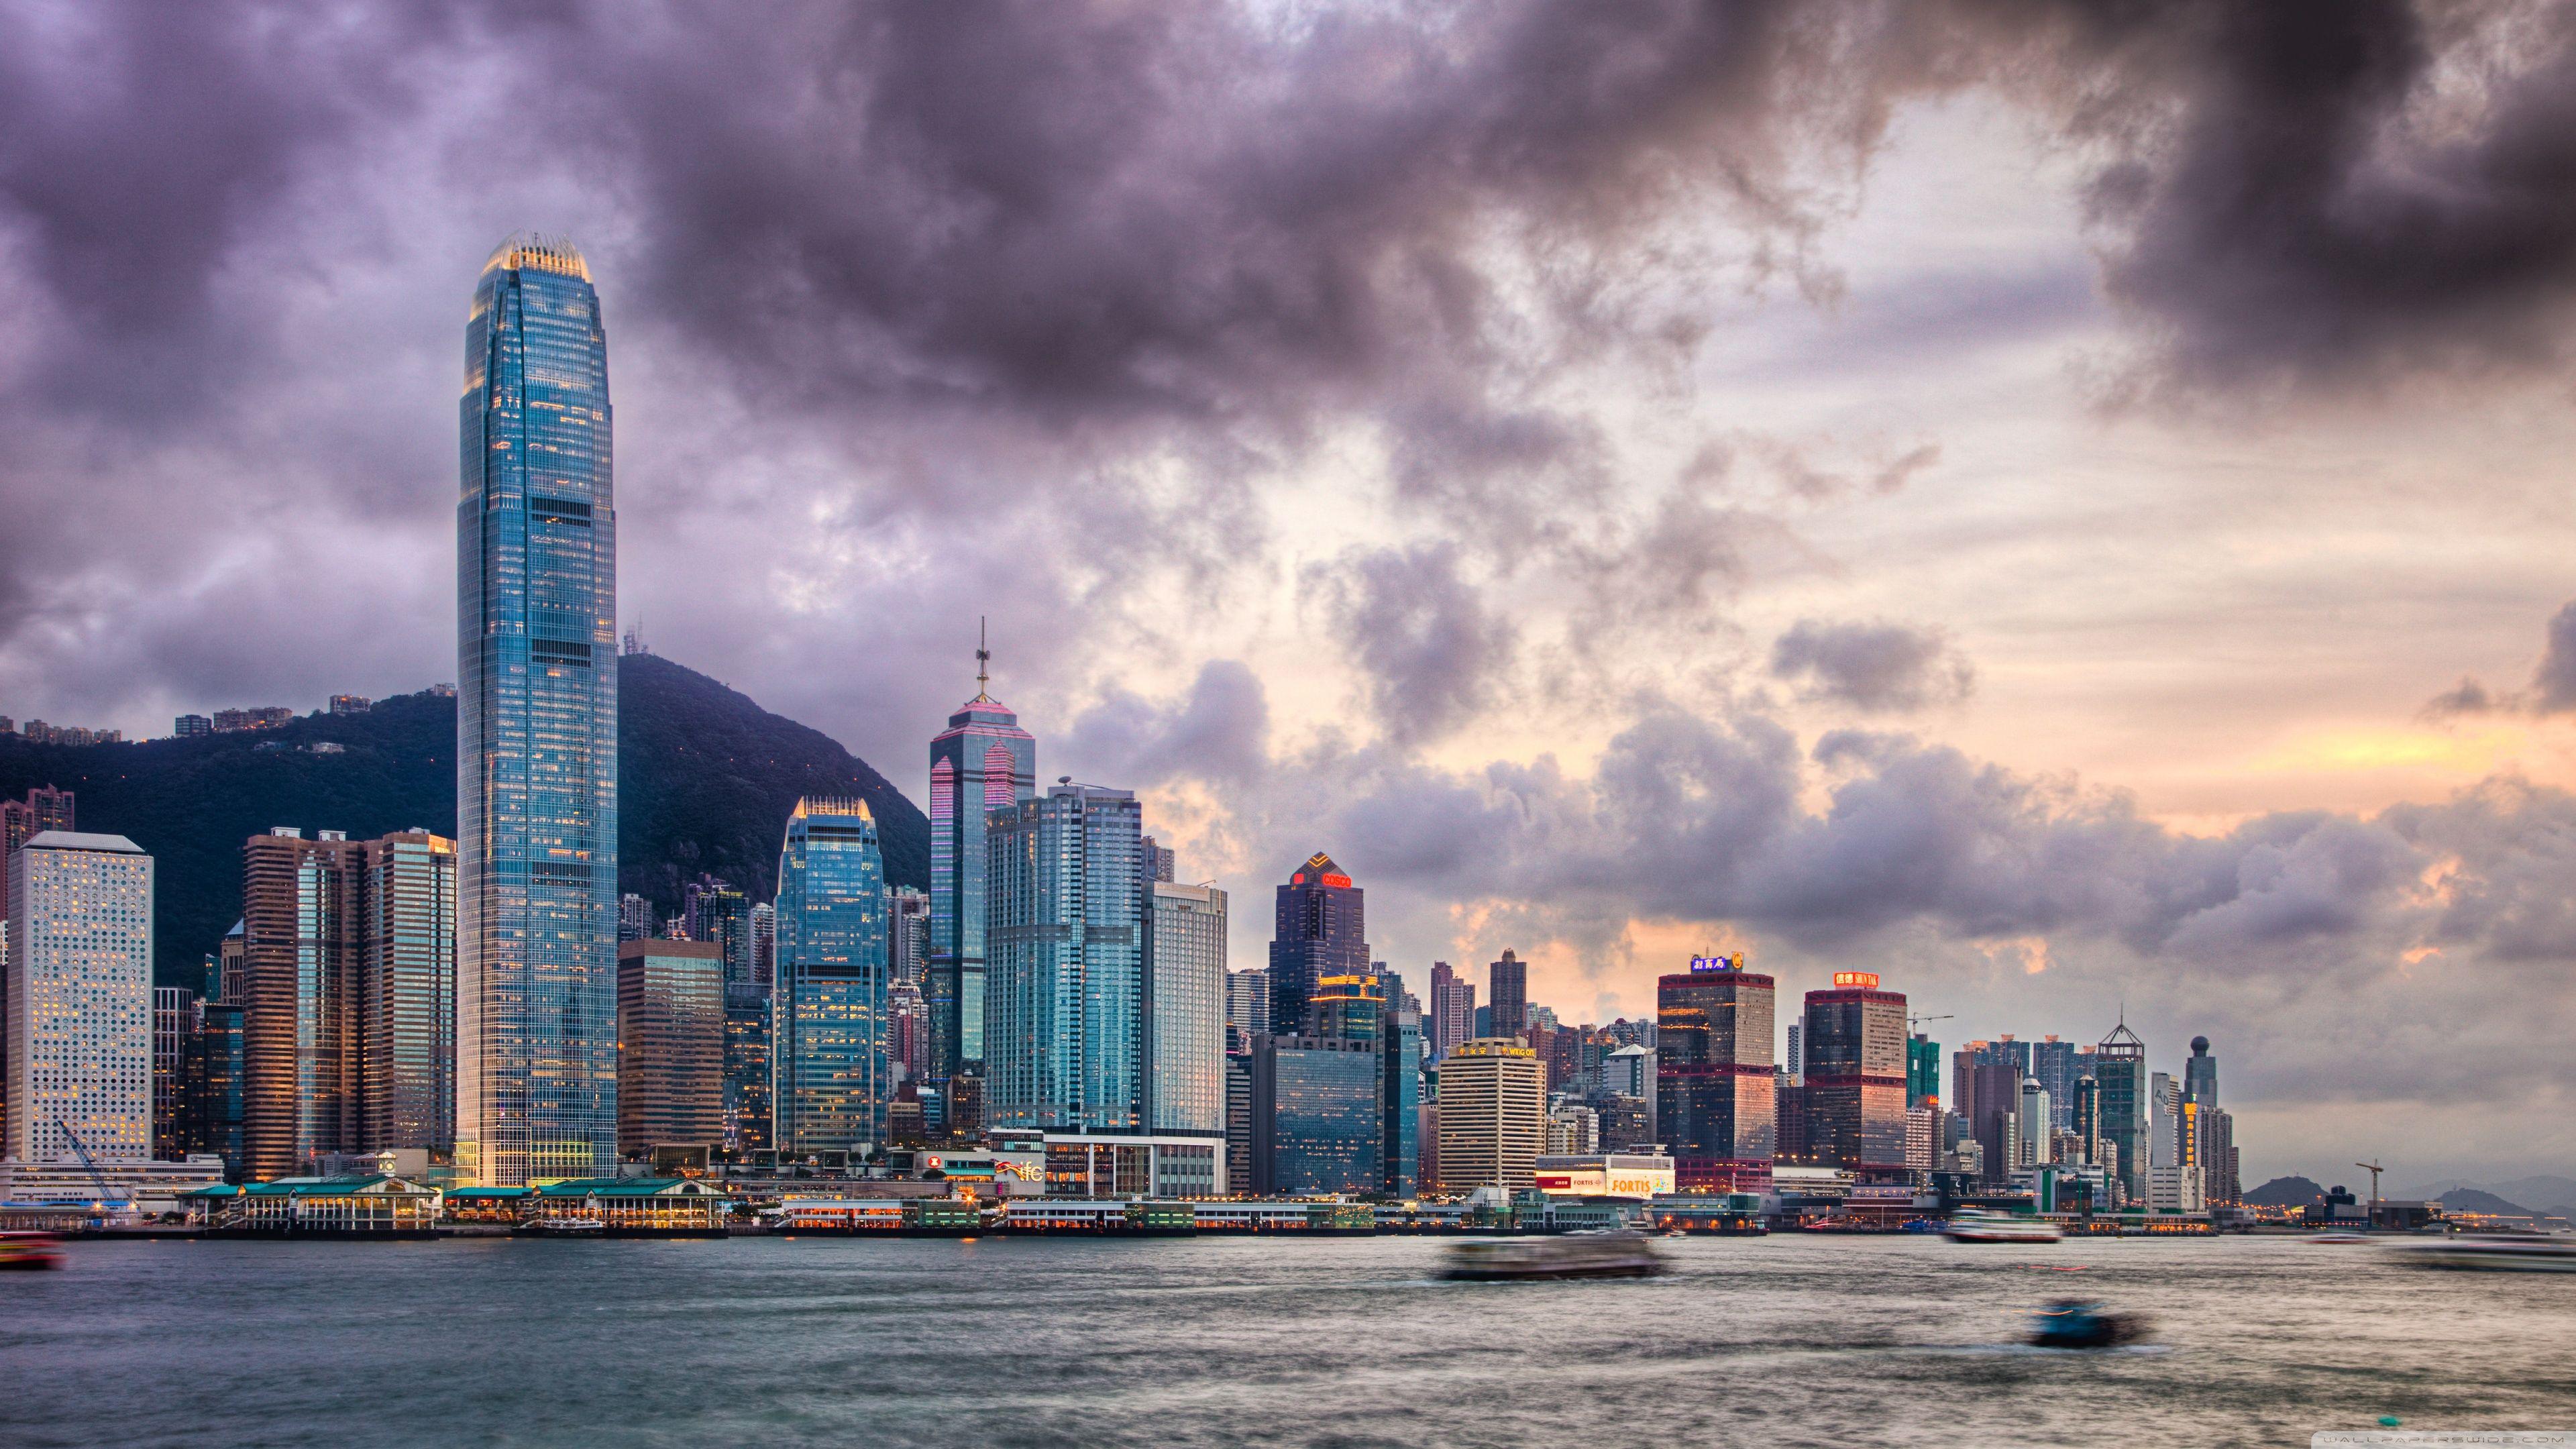 500 Hong Kong Pictures  Download Free Images on Unsplash